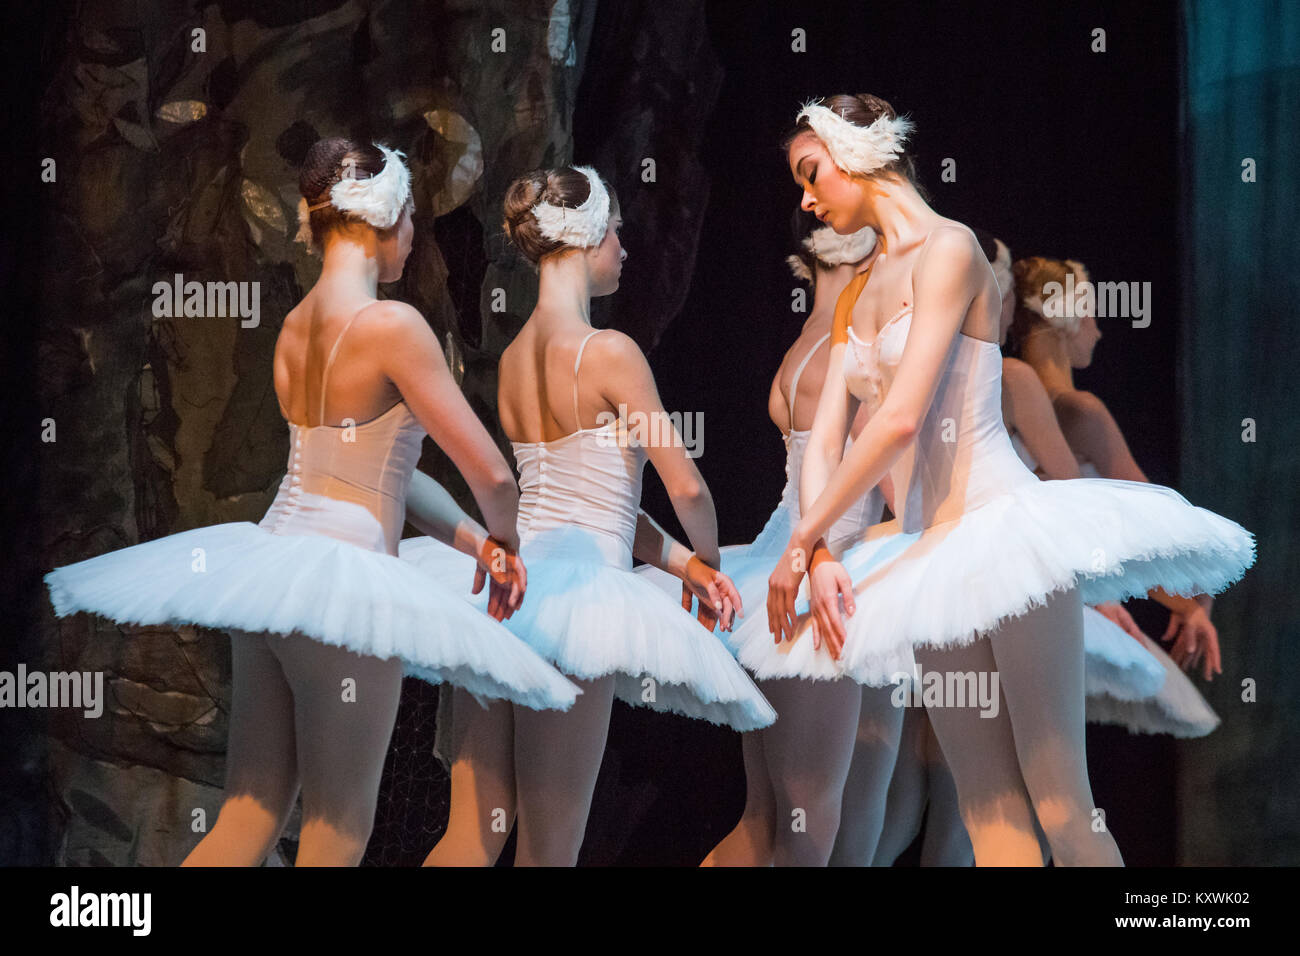 Wetzlar, Germany. 10th Jan, 2018. Swan Lake, ballet composed by Pyotr Ilyich Tchaikovsky, performed by Bolshoi State Ballet of Belarus (directed by Yuri Trayan) at Stadthalle Wetzlar. Scene with white bewitched white swans. Credit: Christian Lademann Stock Photo